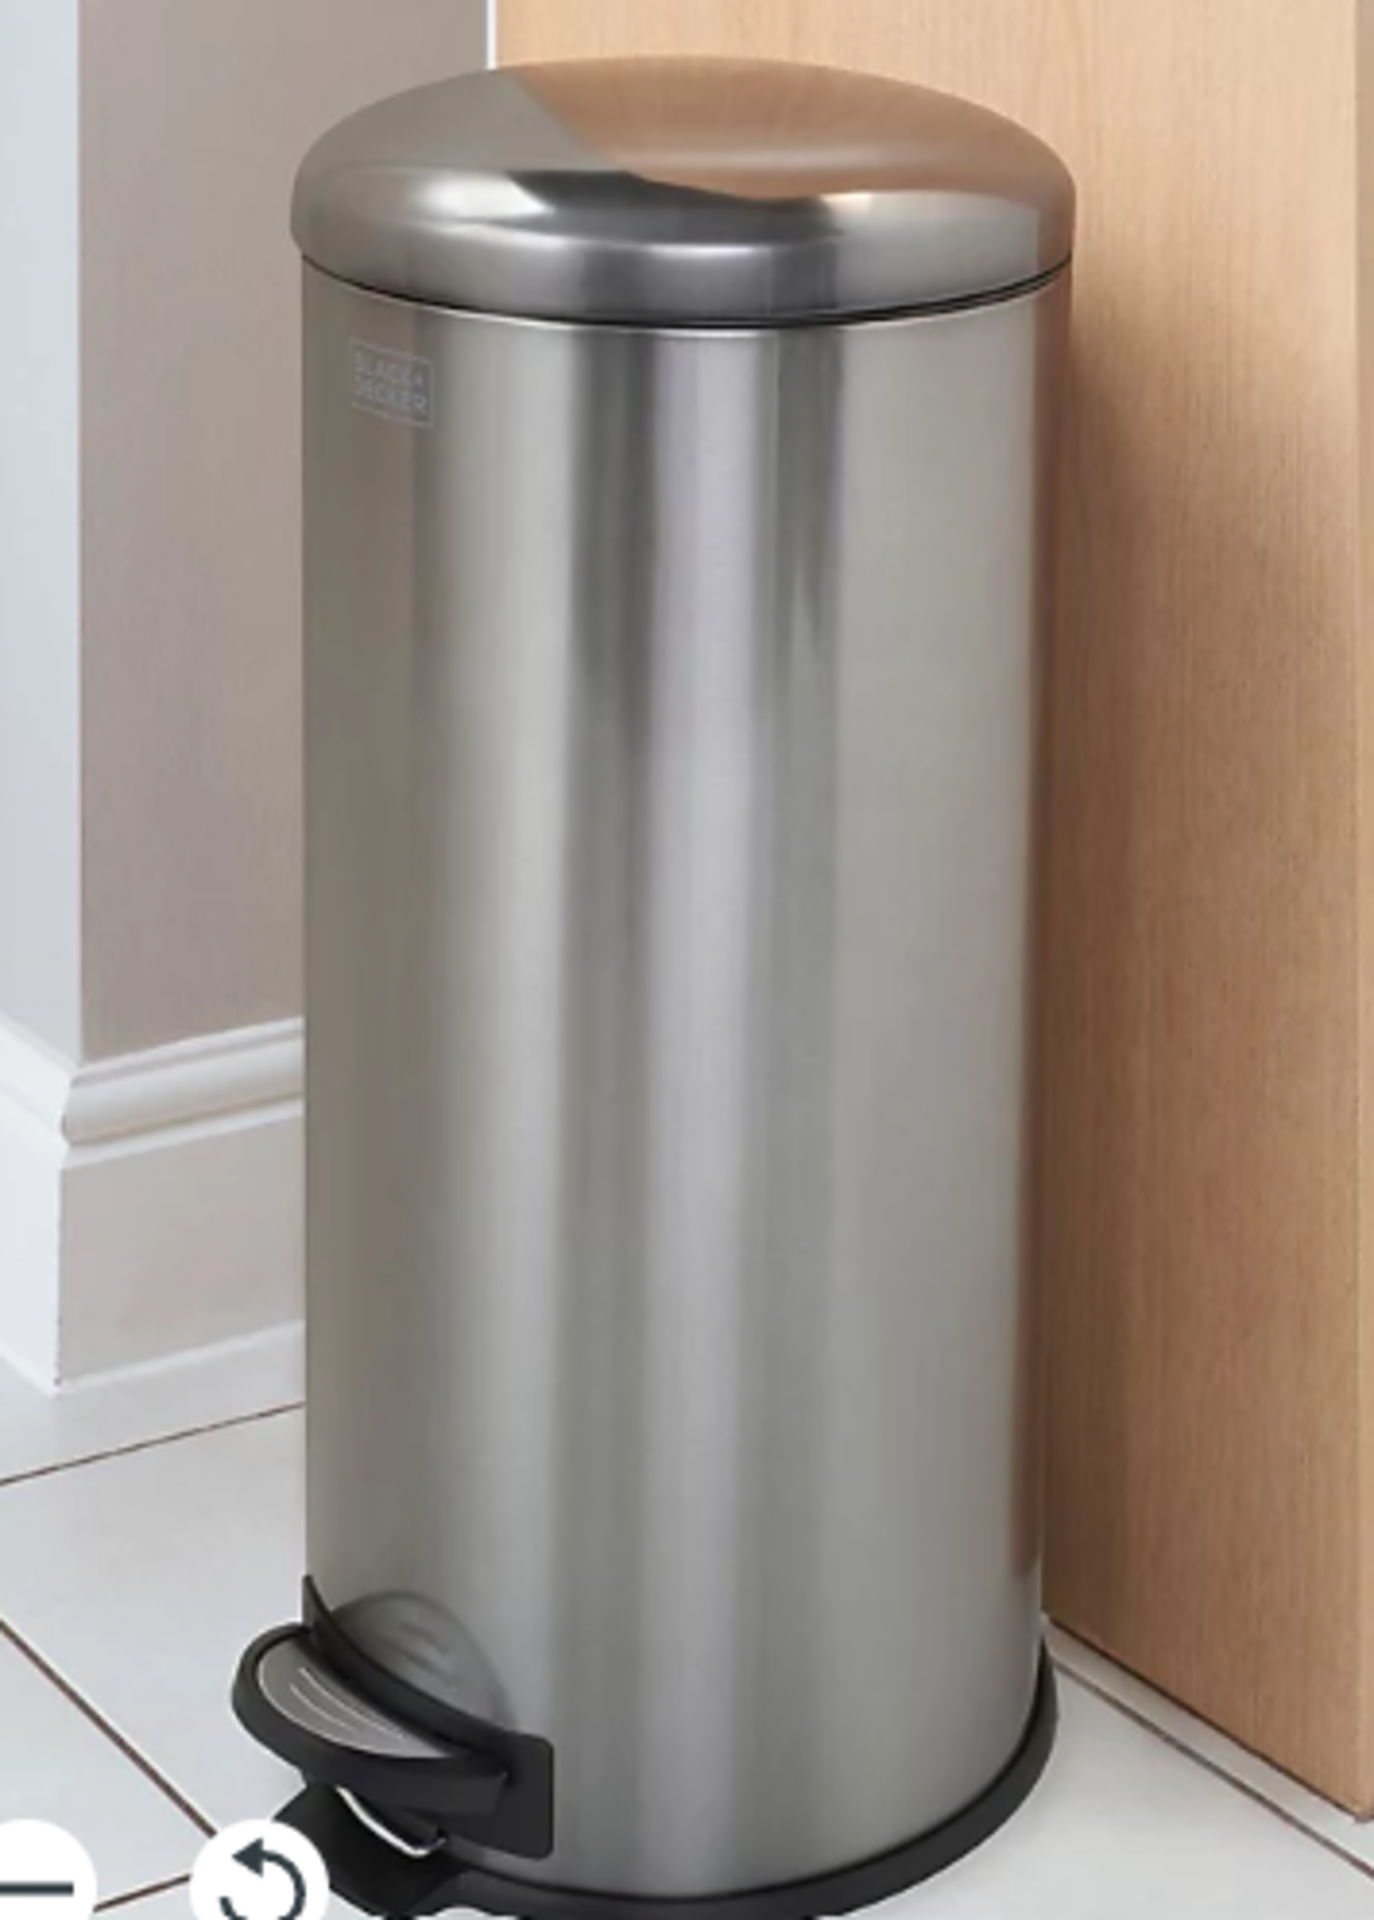 2 x BLACK+DECKER 61119 30L Dark Stainless Steel Dome Shaped Pedal Bin With Soft Close Lid- BW